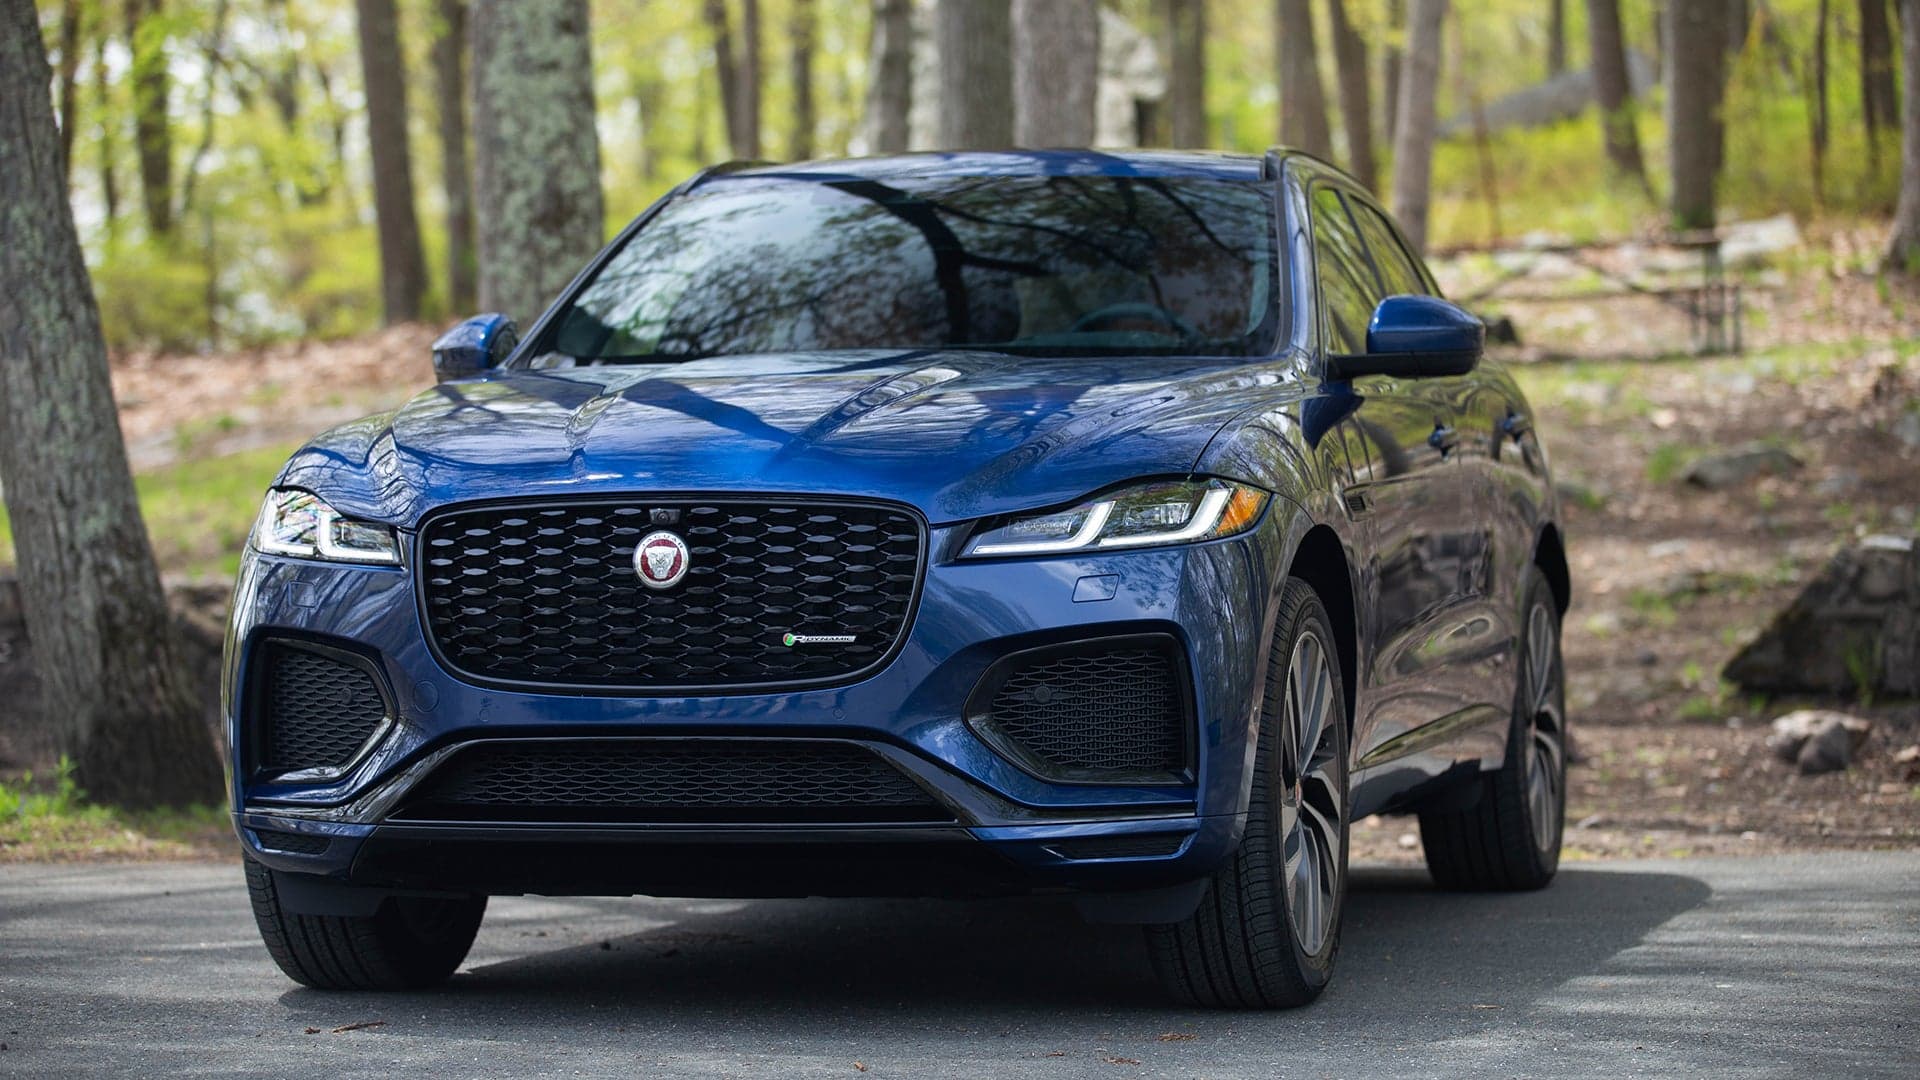 2021 Jaguar F-Pace Review: A 395-HP SUV That Stands Out With Luxury and Performance